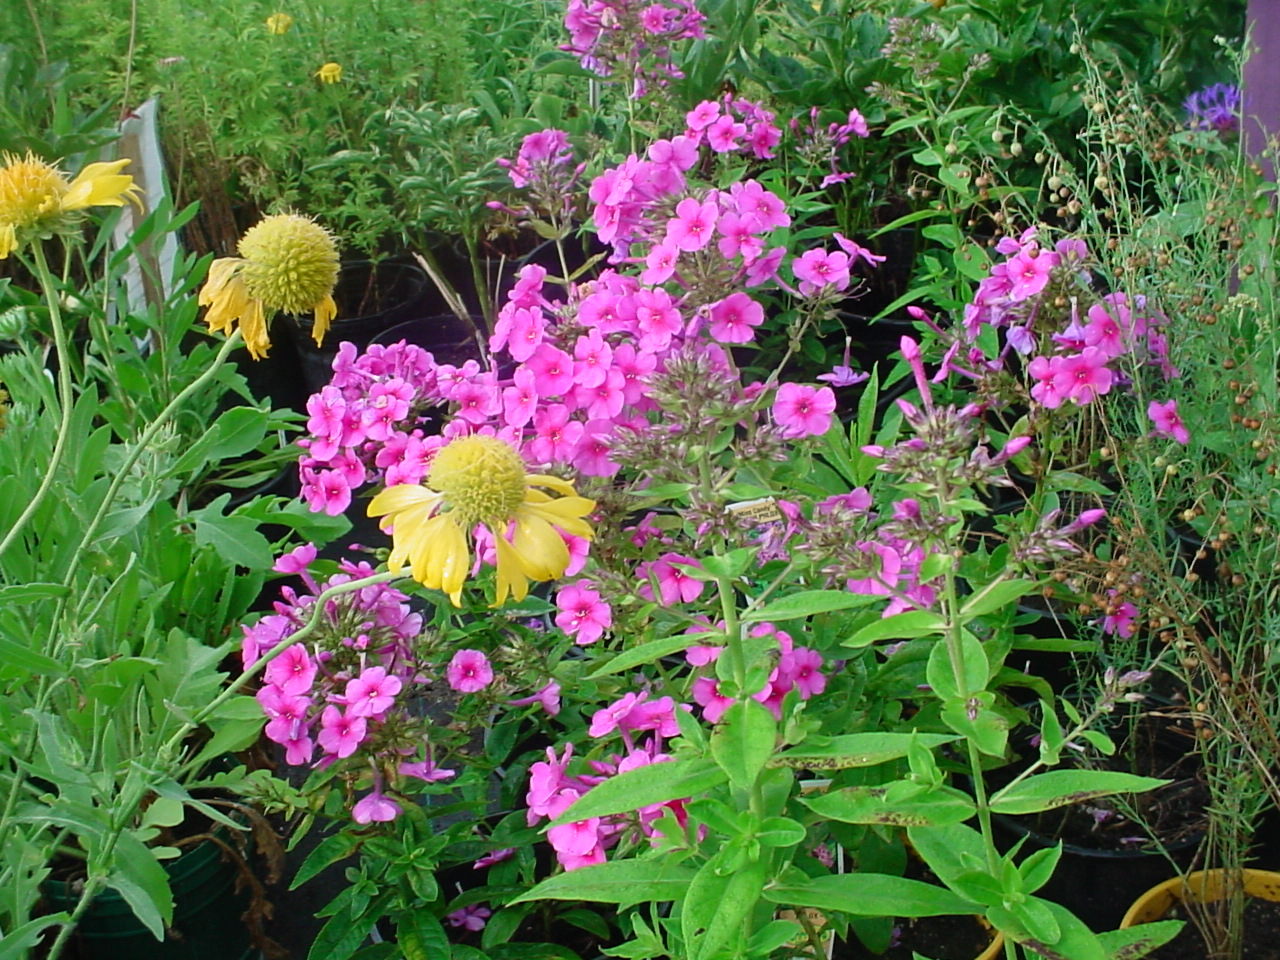 It seems that often people are drawn to the Phlox perennial plants as they offer an intense beauty that is impossible to go unnoticed.